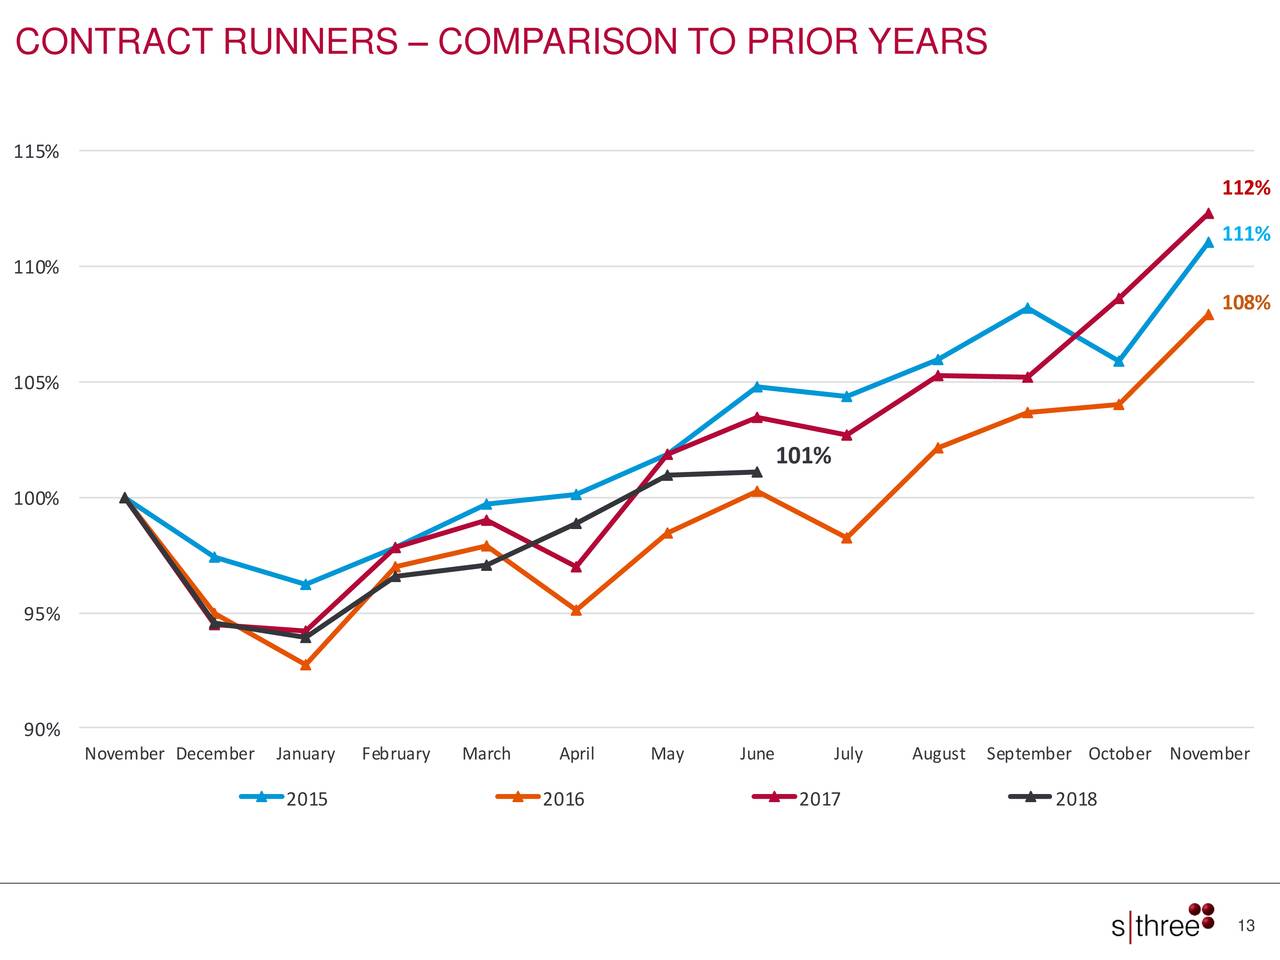 CONTRACT RUNNERS – COMPARISON TO PRIOR YEARS